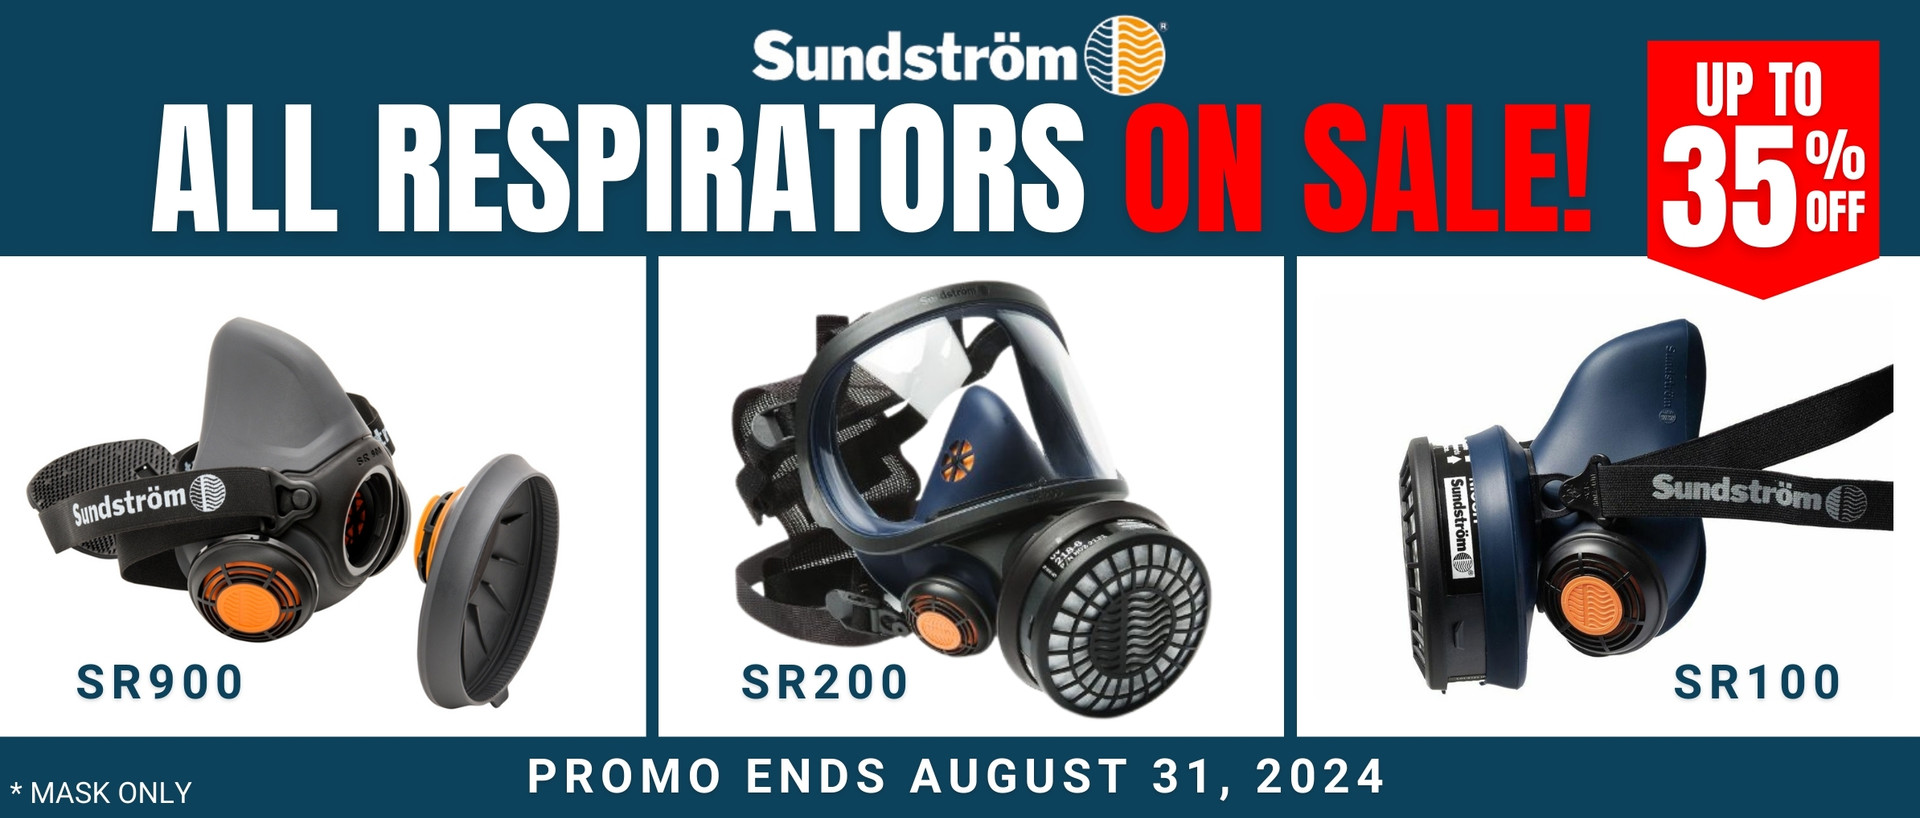 SAVE to To 35% on All Sundstrom Respirator masks! Sale ending August 30, 2024!